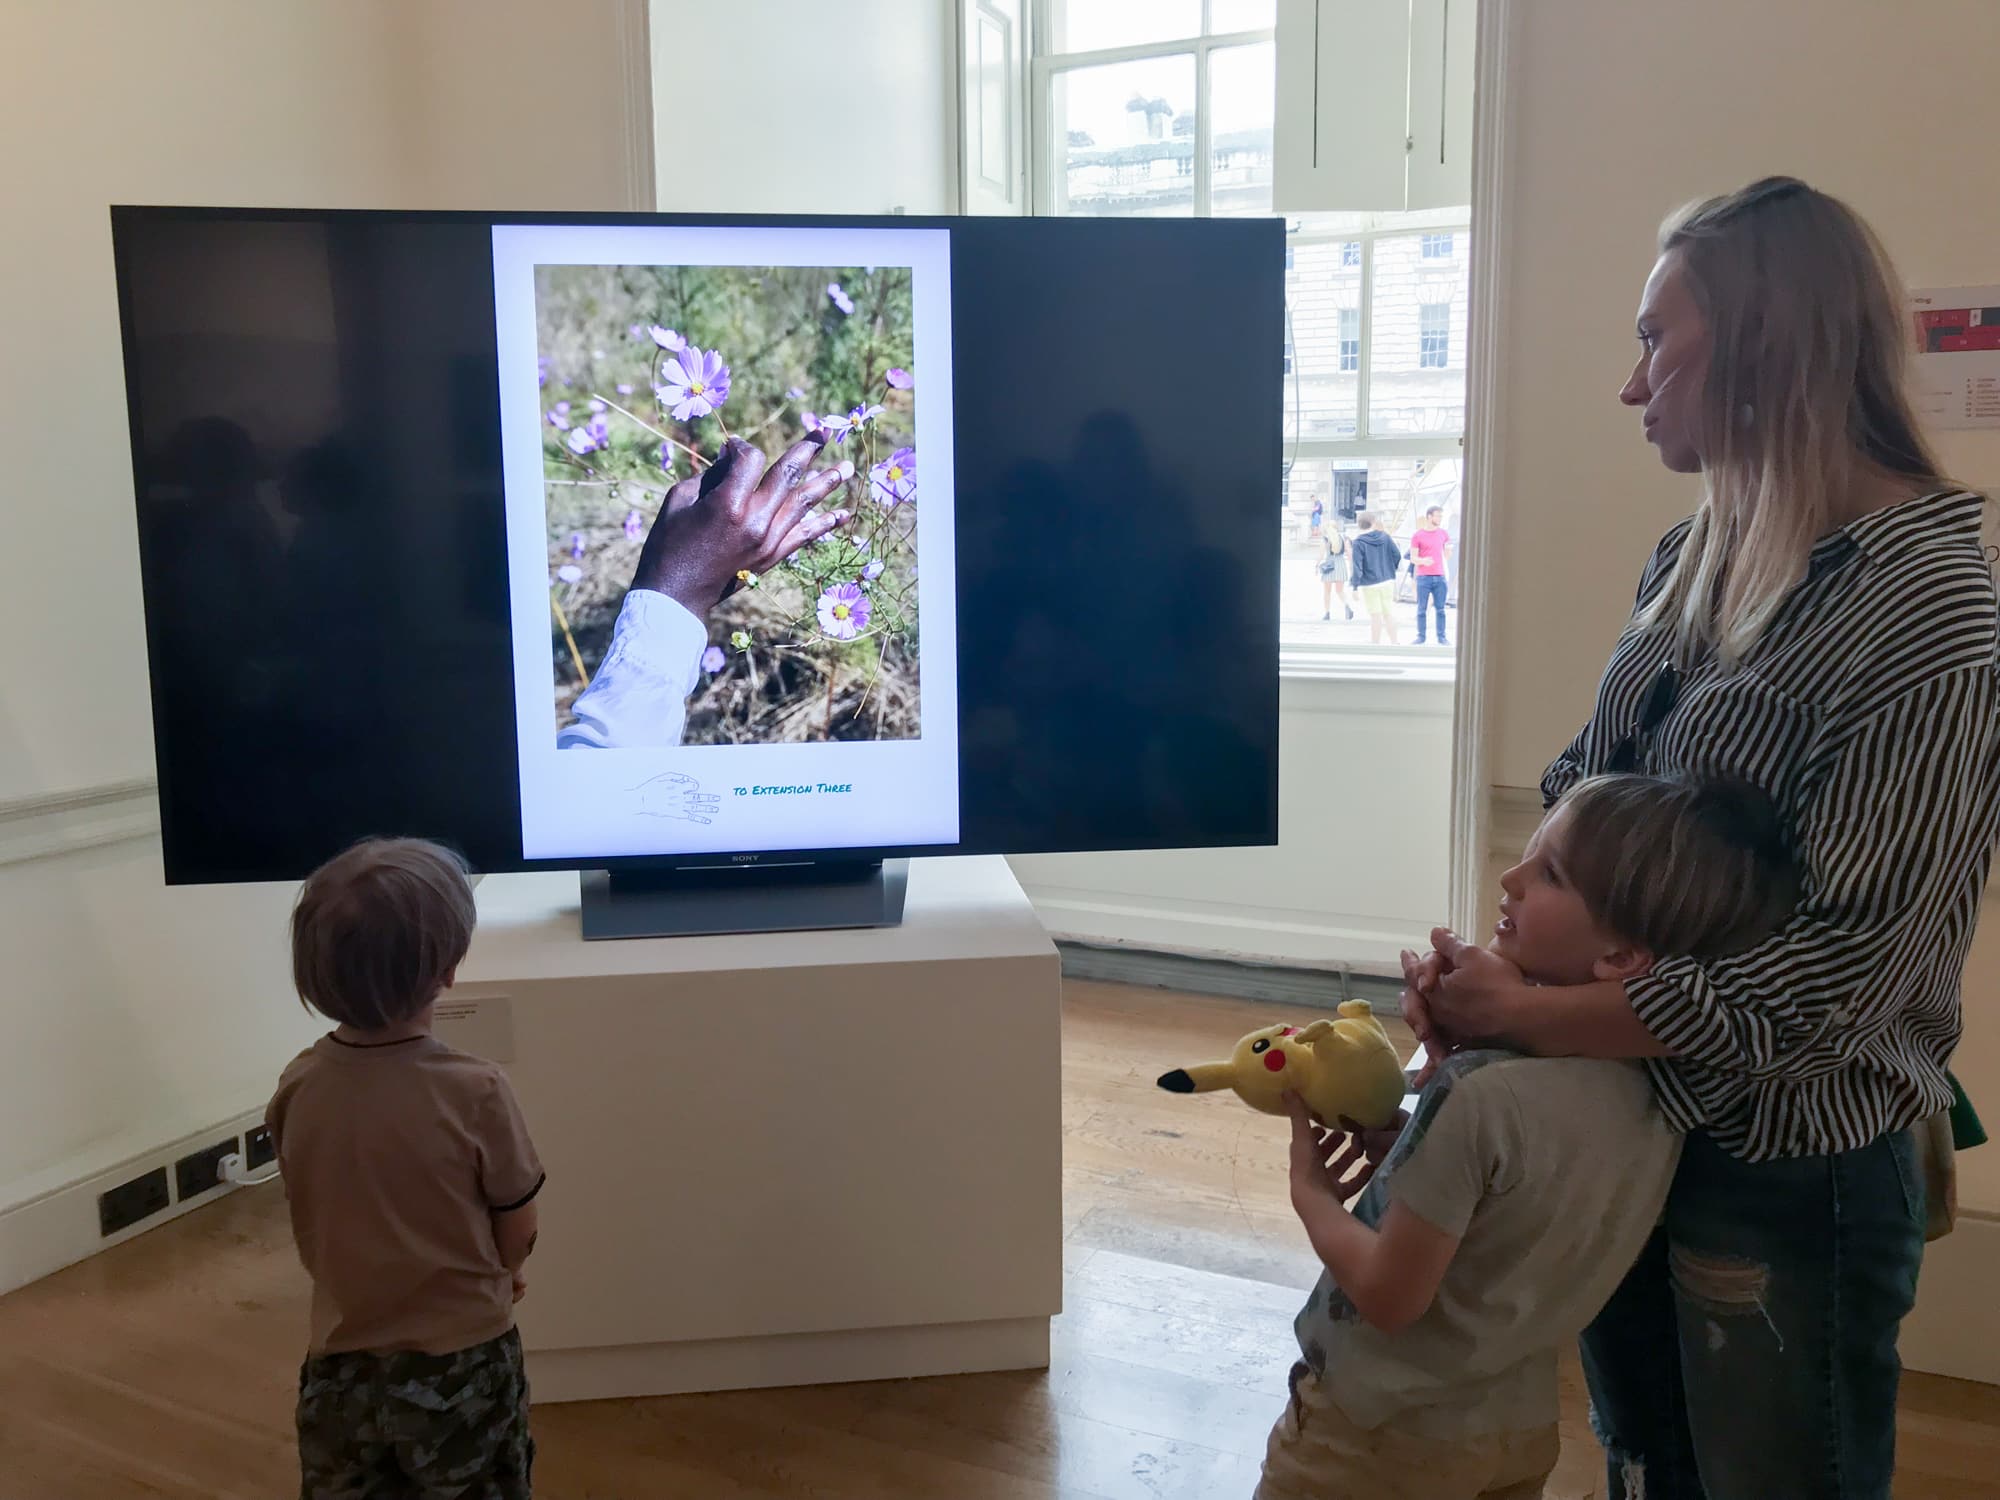 Exhibition of "How to get home" at Somerset House, London, for the Sony World Photo Award 2018, Category Creative.